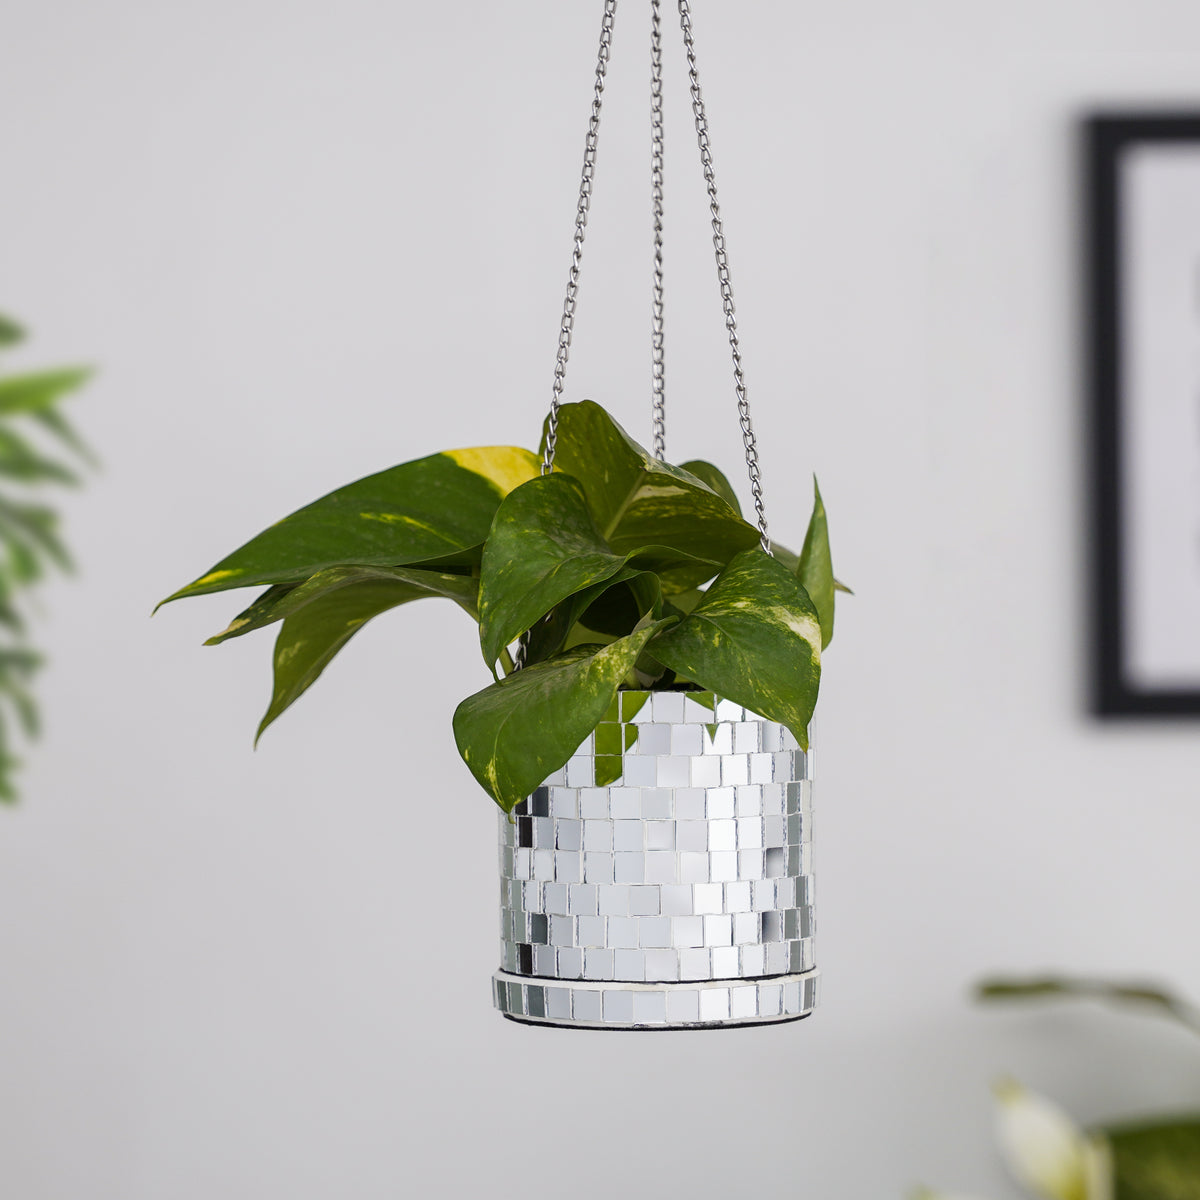 DISCO Cylindrical Metal Hanging Silver Planter with Chain for Home & Office Decor